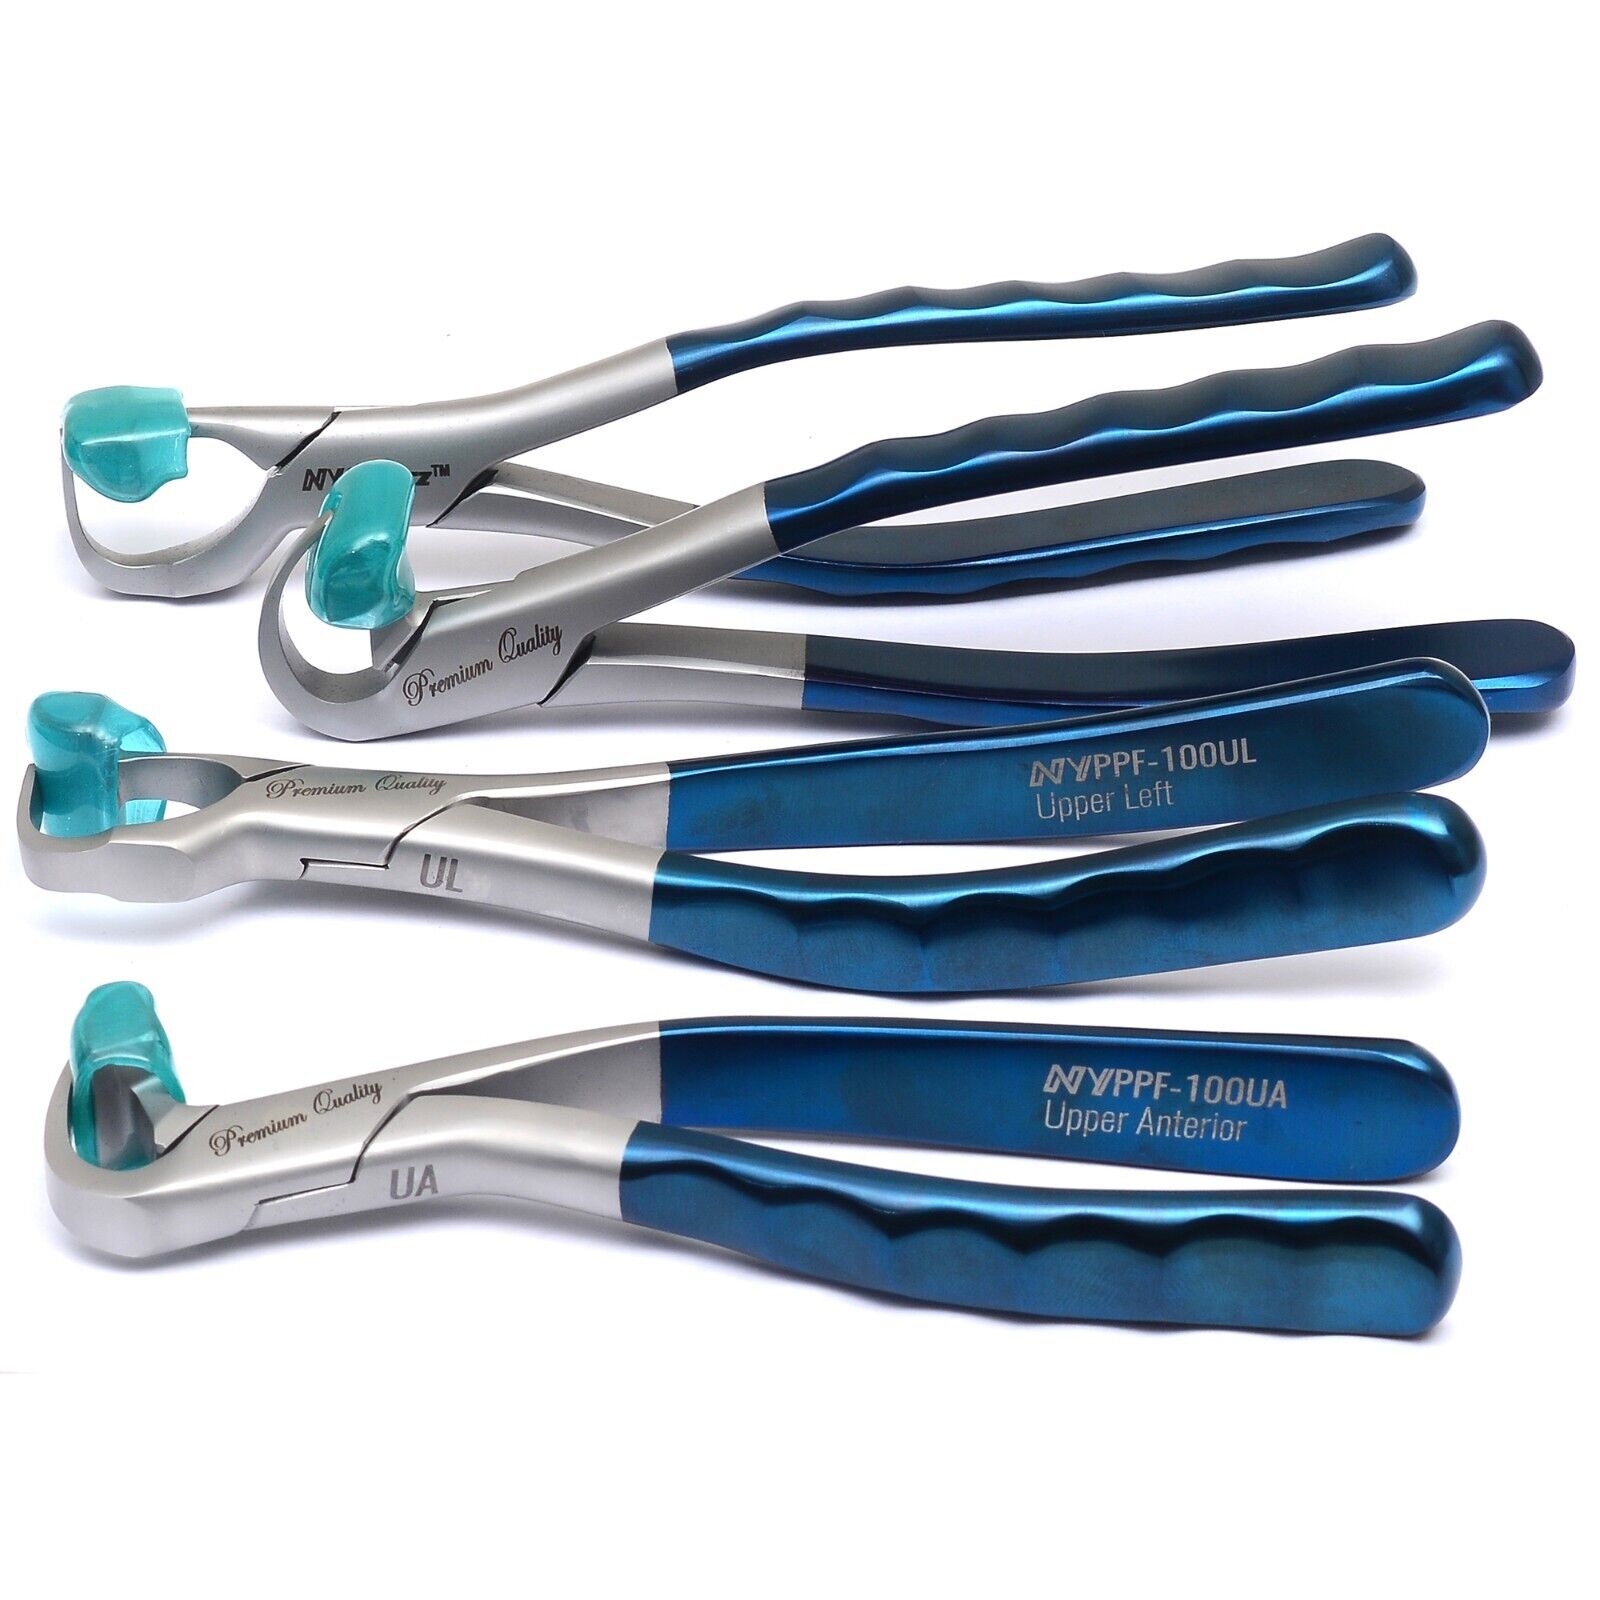 “Why NYGEARZ is the Top Choice for Surgical Products”